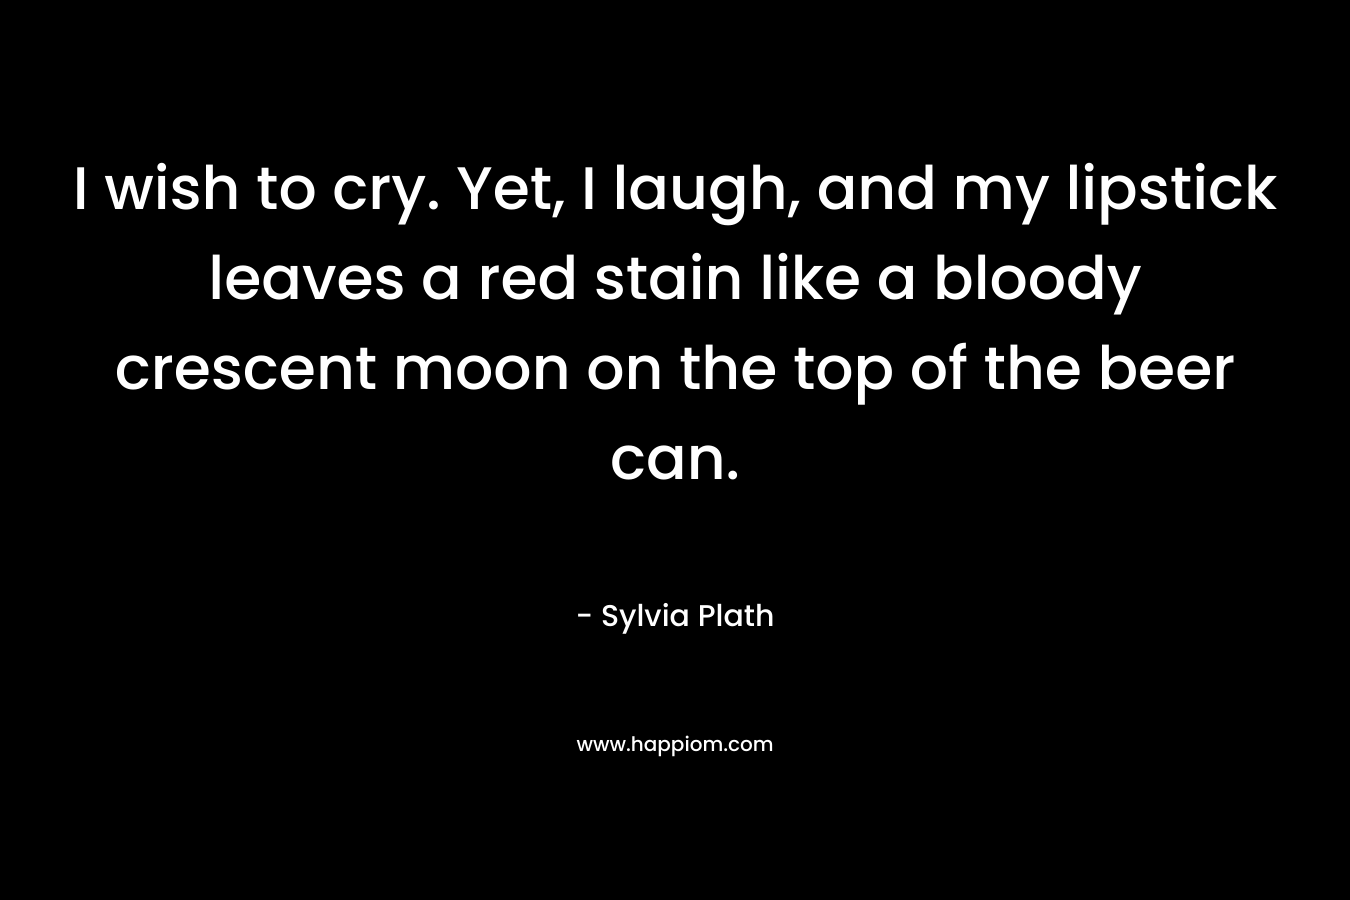 I wish to cry. Yet, I laugh, and my lipstick leaves a red stain like a bloody crescent moon on the top of the beer can. – Sylvia Plath